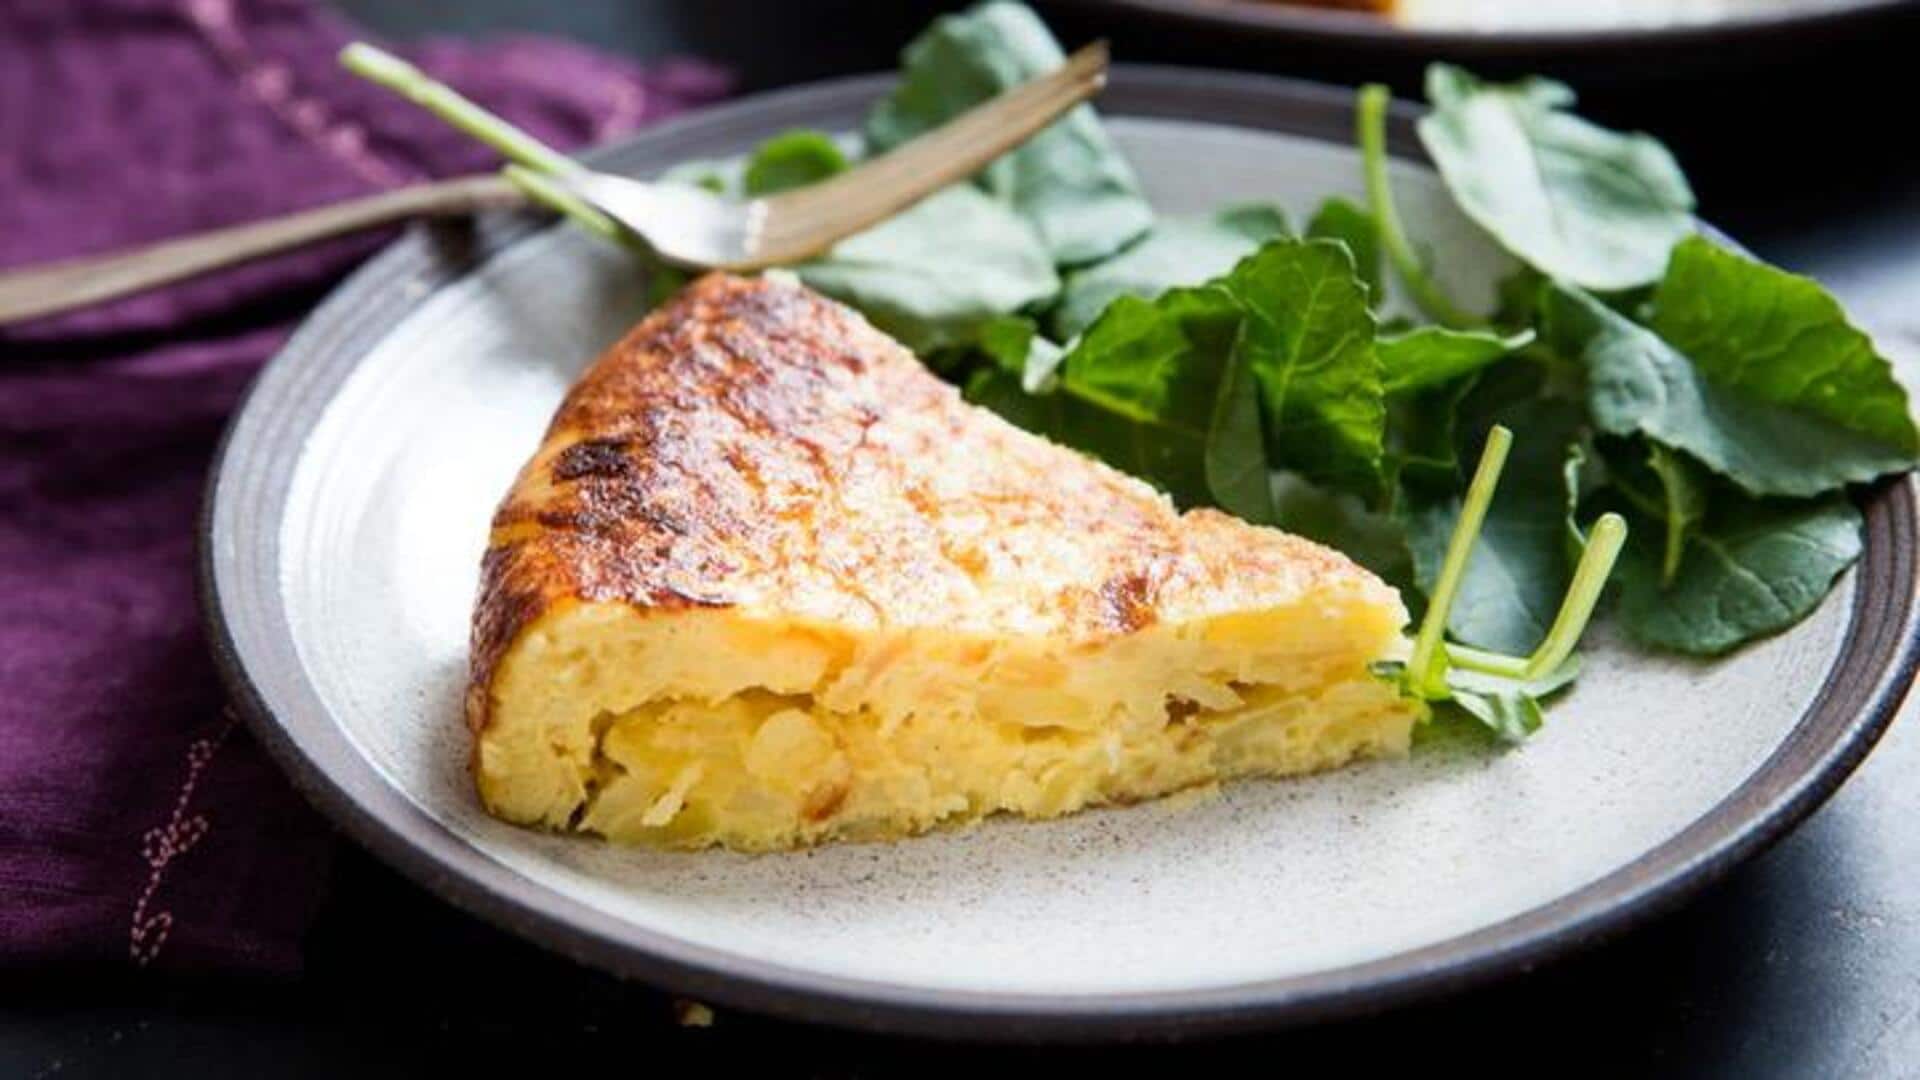 Spain on your plate: Try this tortilla espanola recipe today